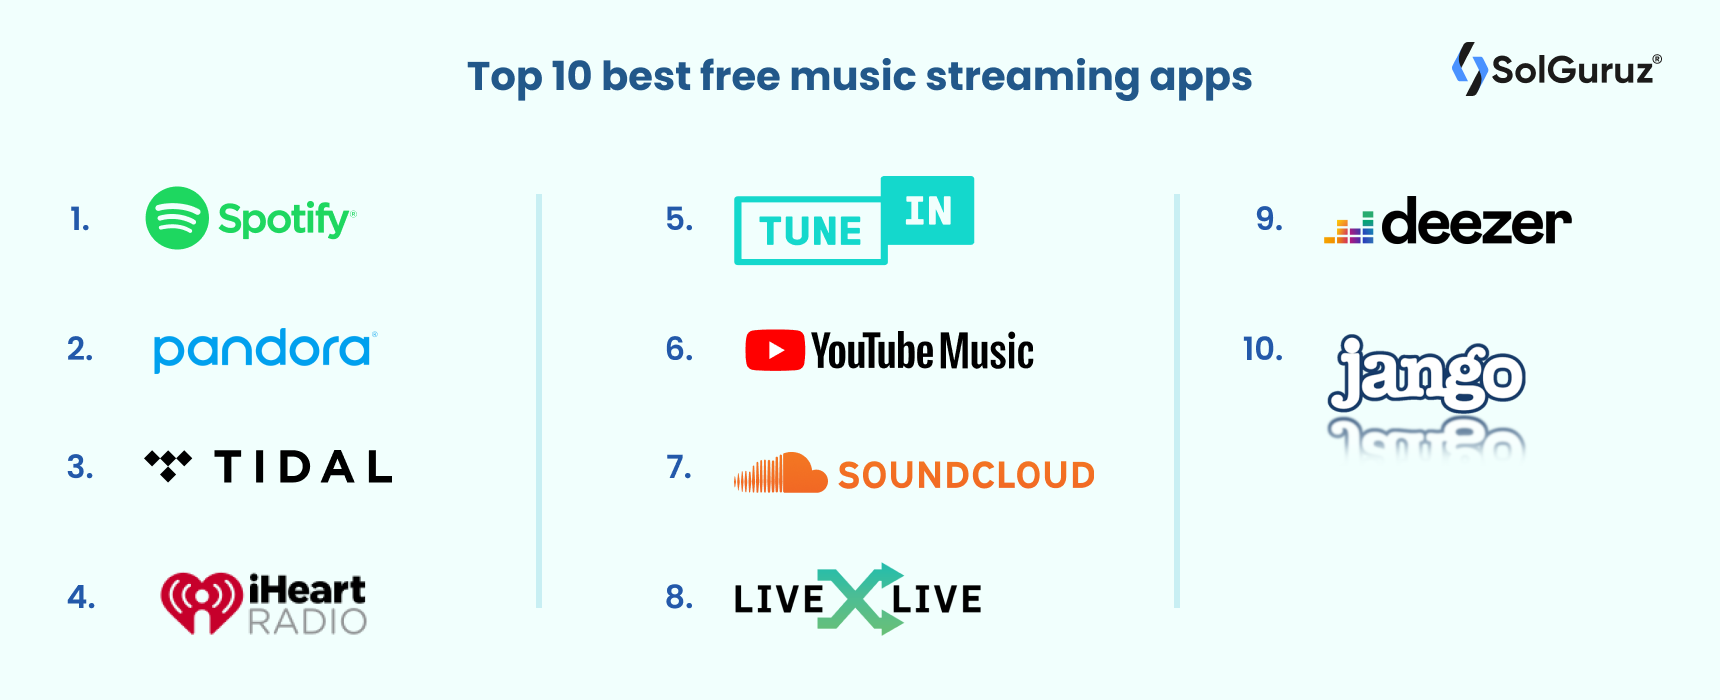 Top 10 best free music streaming apps